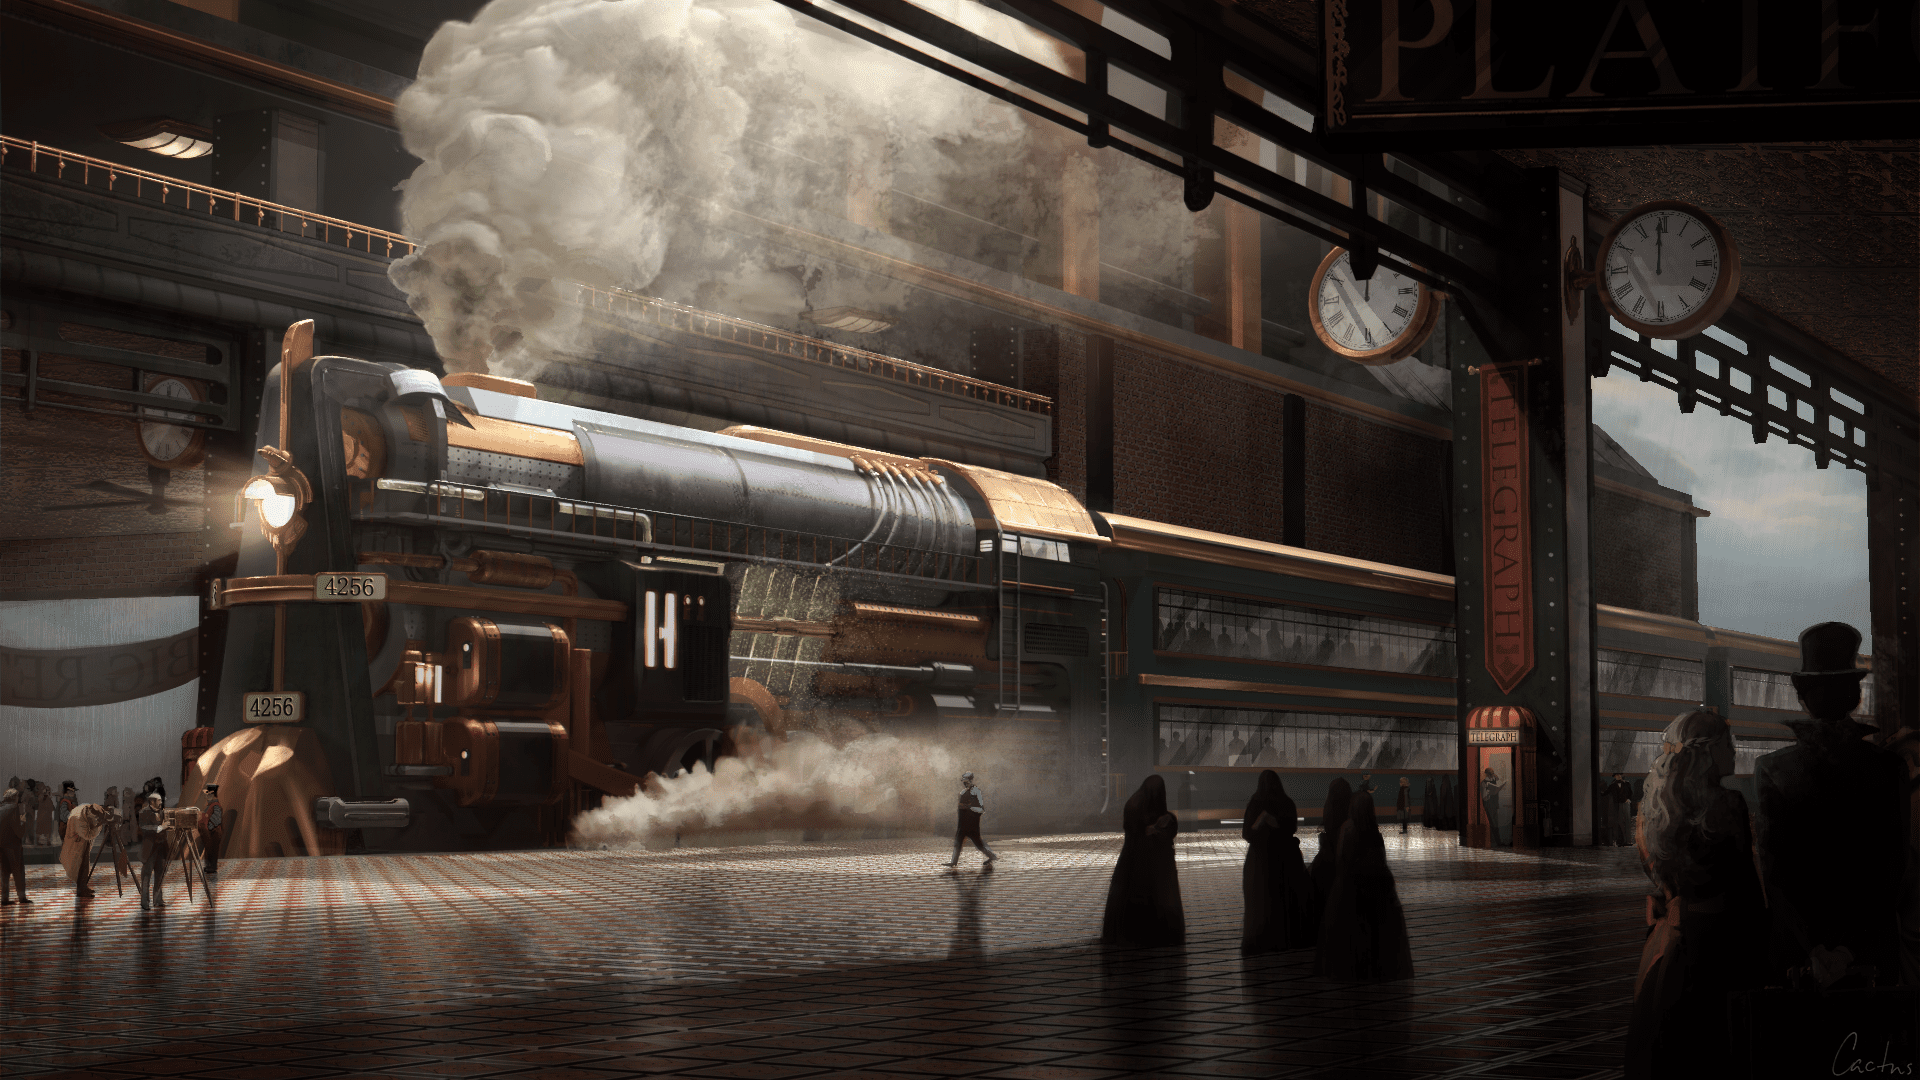 digital illustration of a steam train pulling into a dimly lit station.